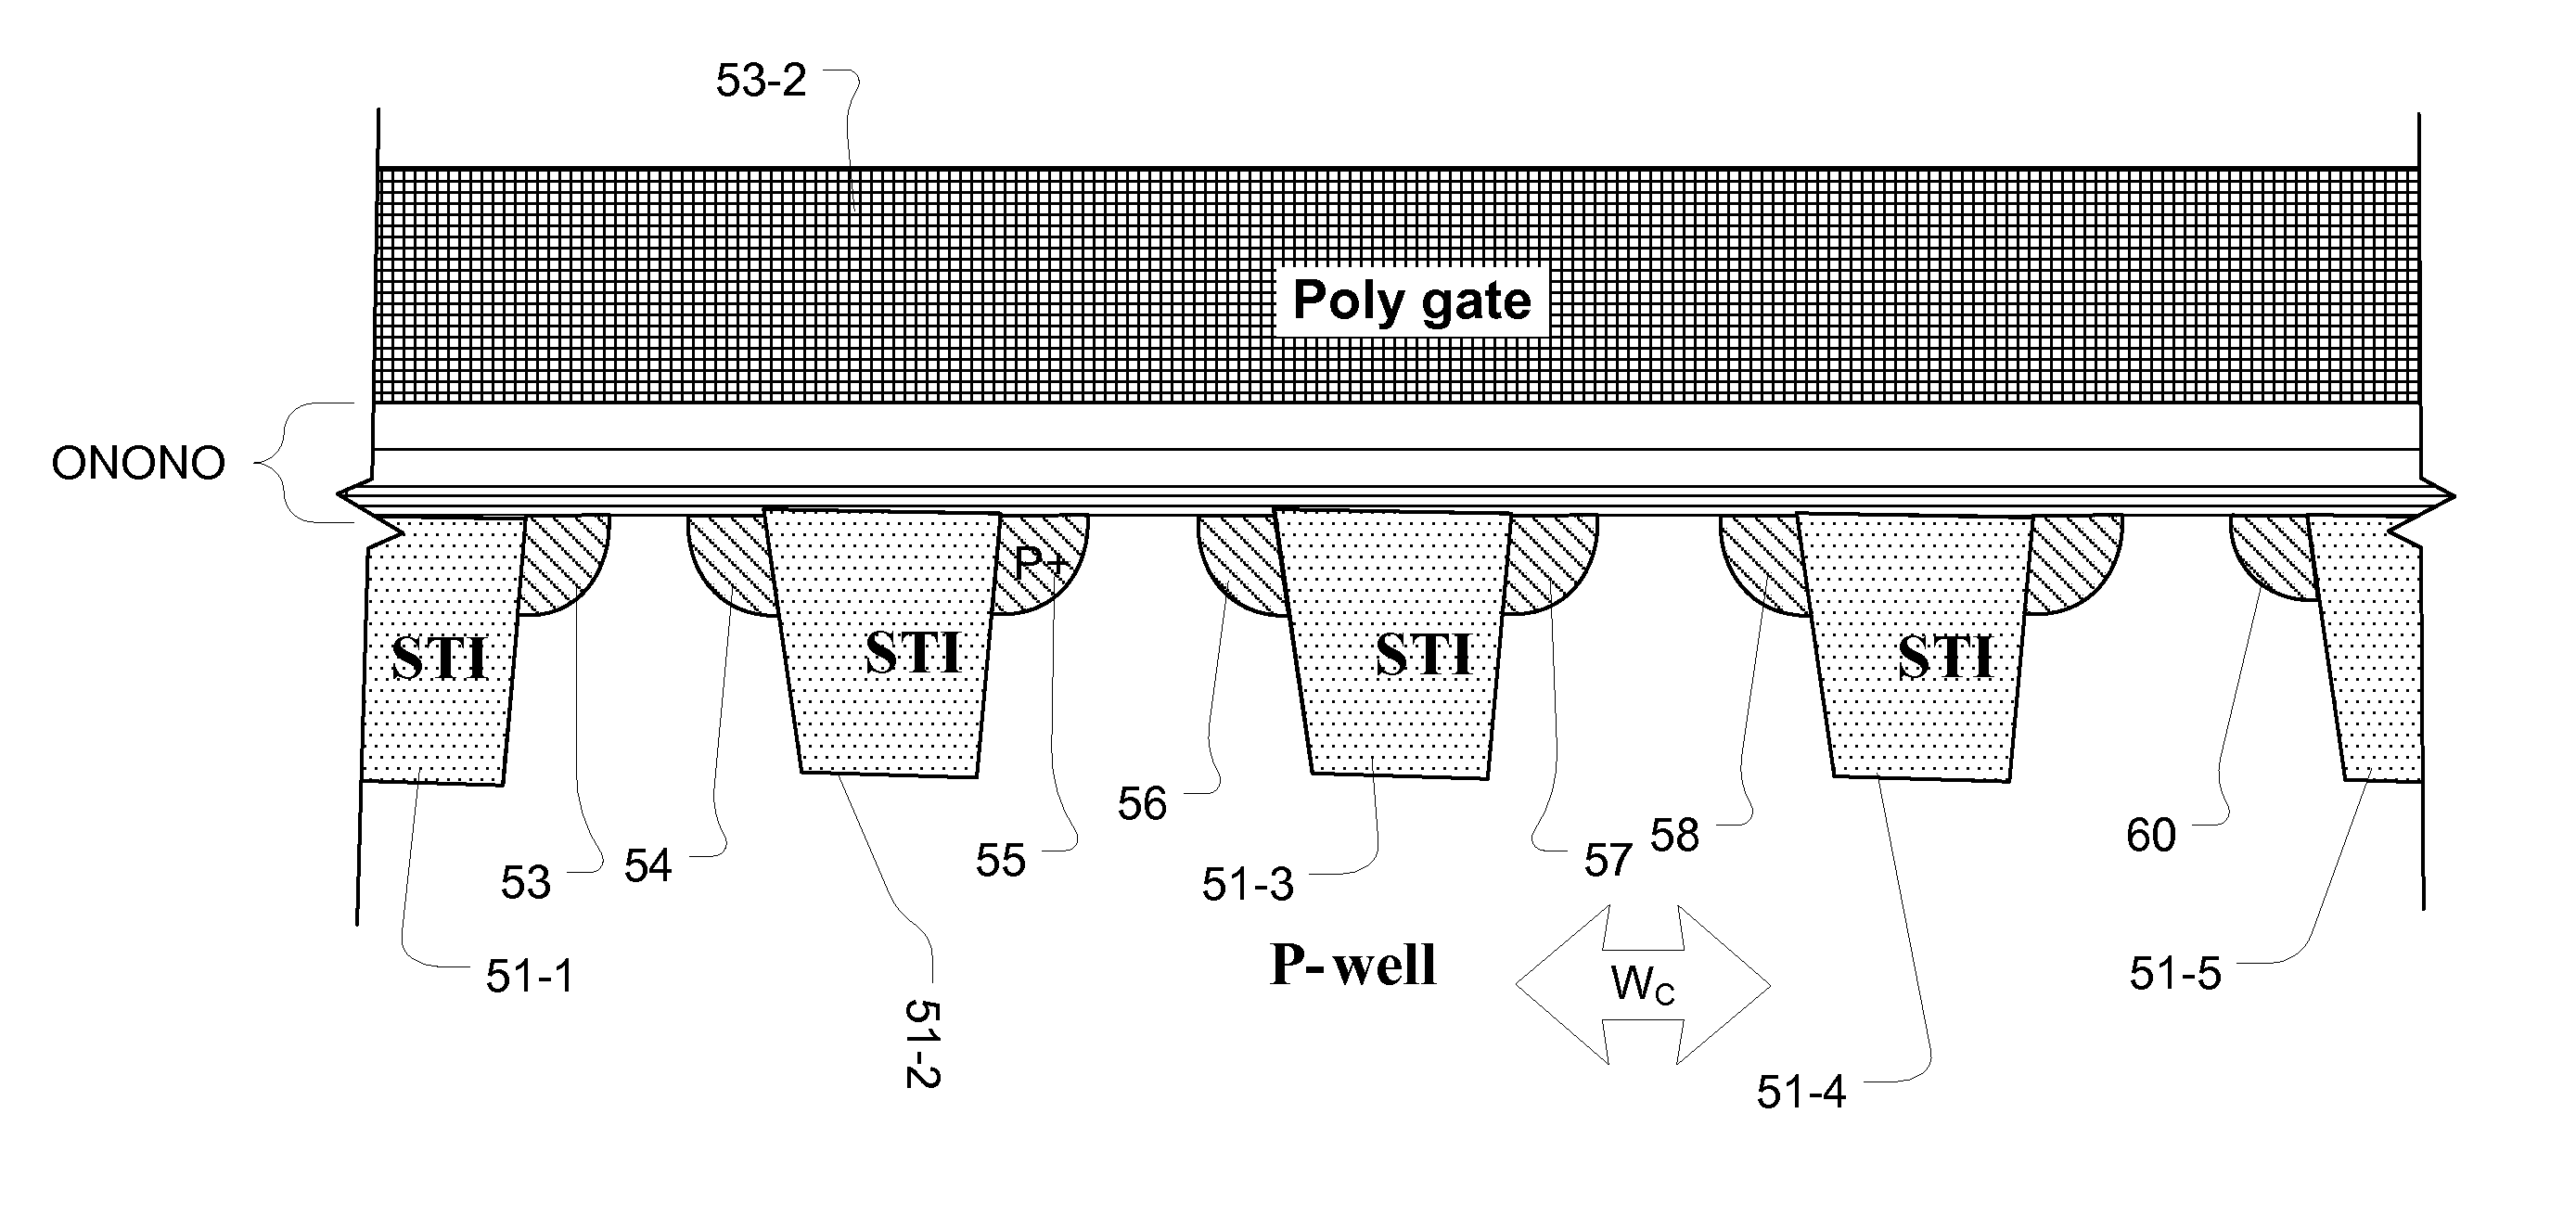 Lateral pocket implant charge trapping devices